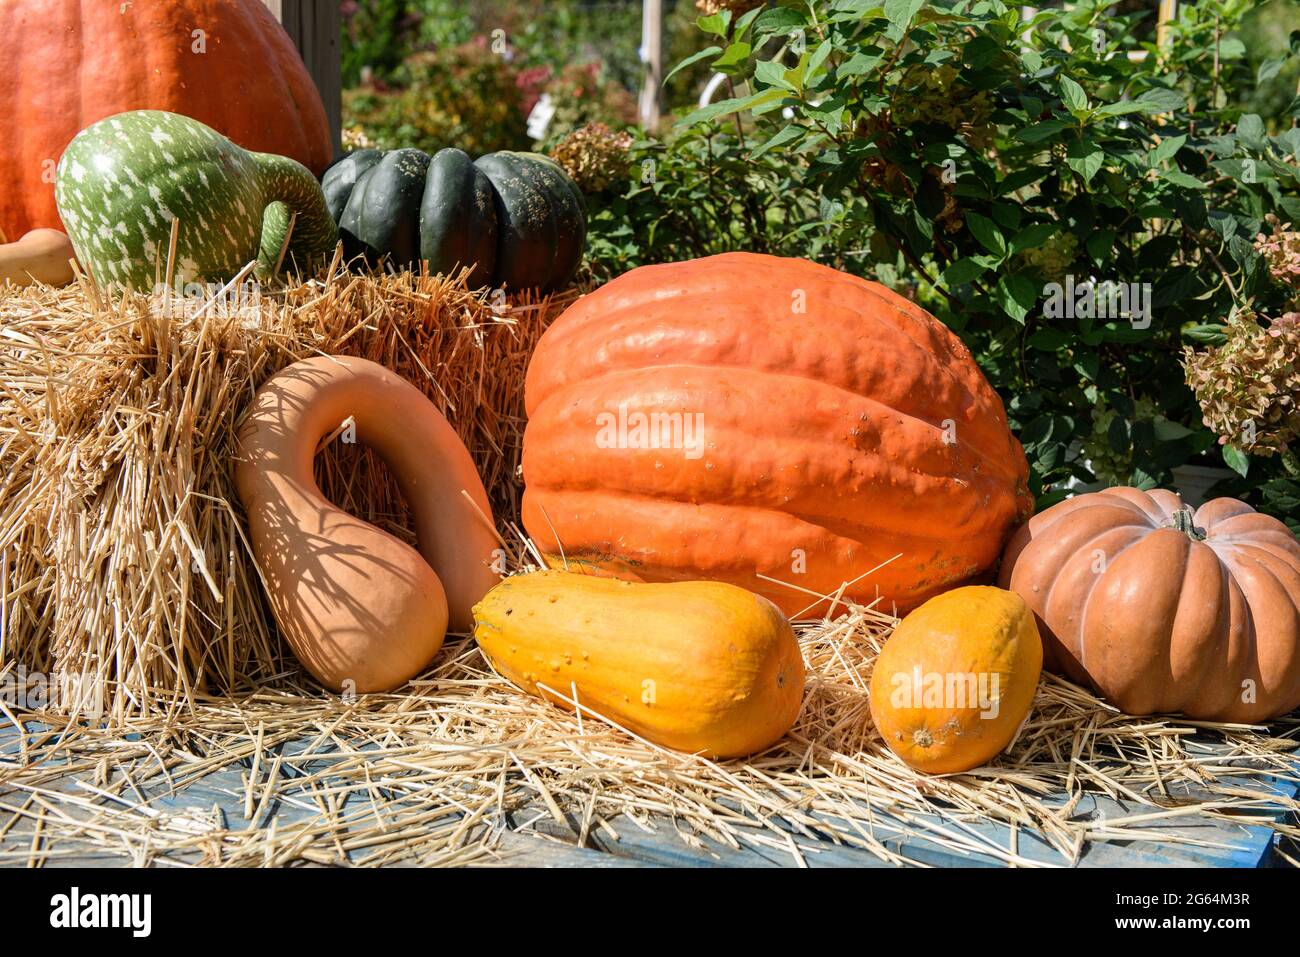 Pumpkins and squash with a bale of hay and greenery at a local farmers market. Stock Photo